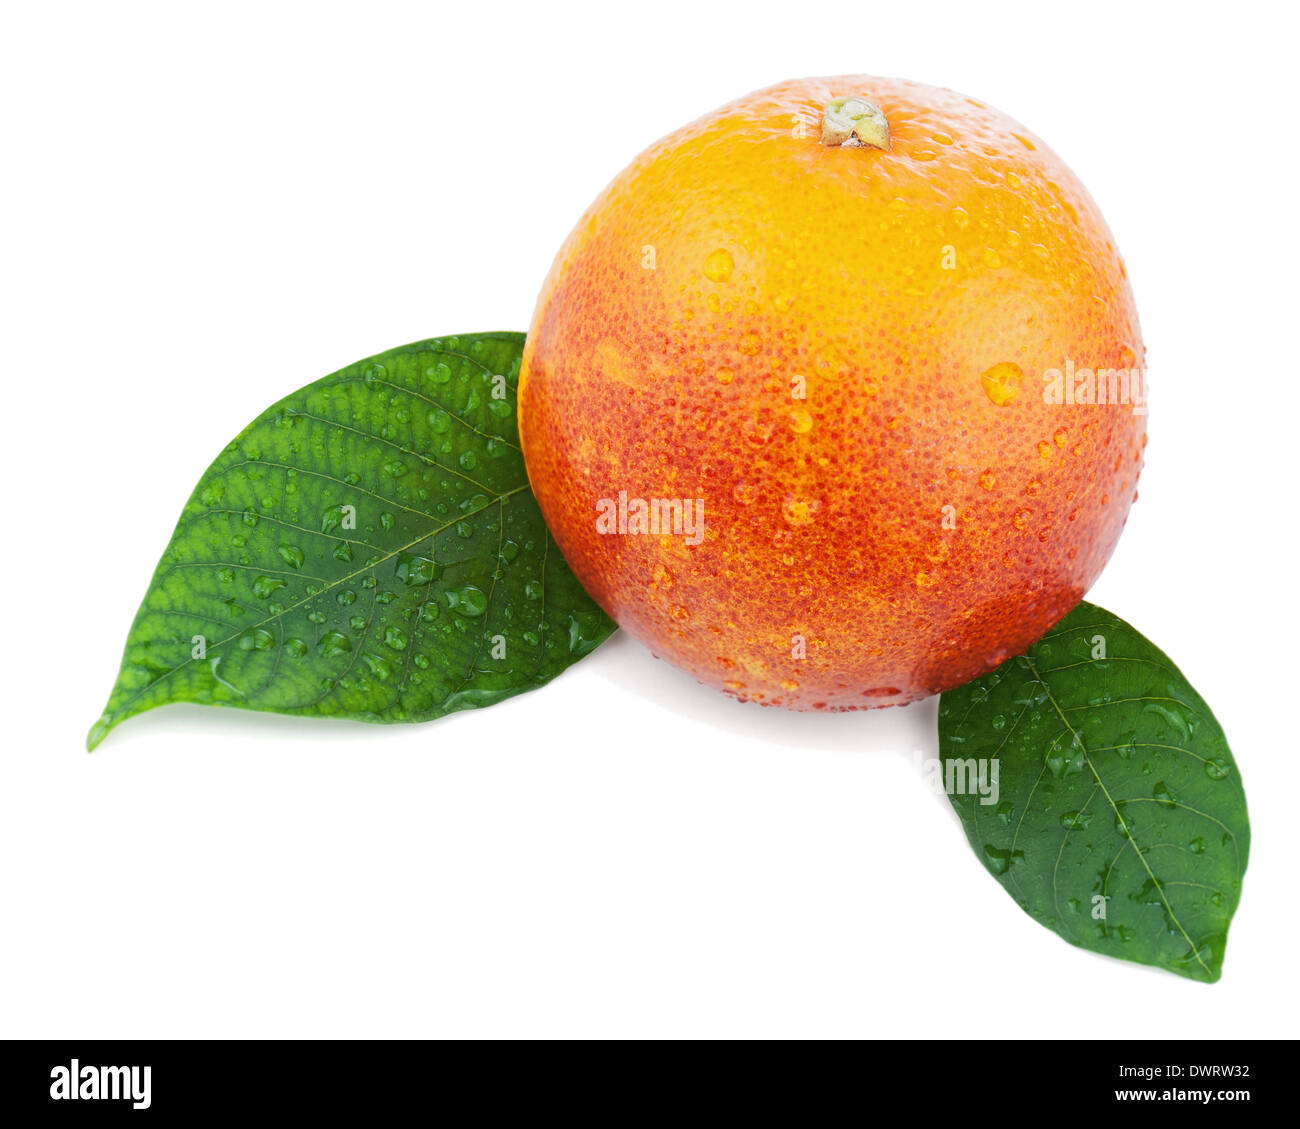 Blood orange with green leaves isolated on white background. Closeup. Stock Photo